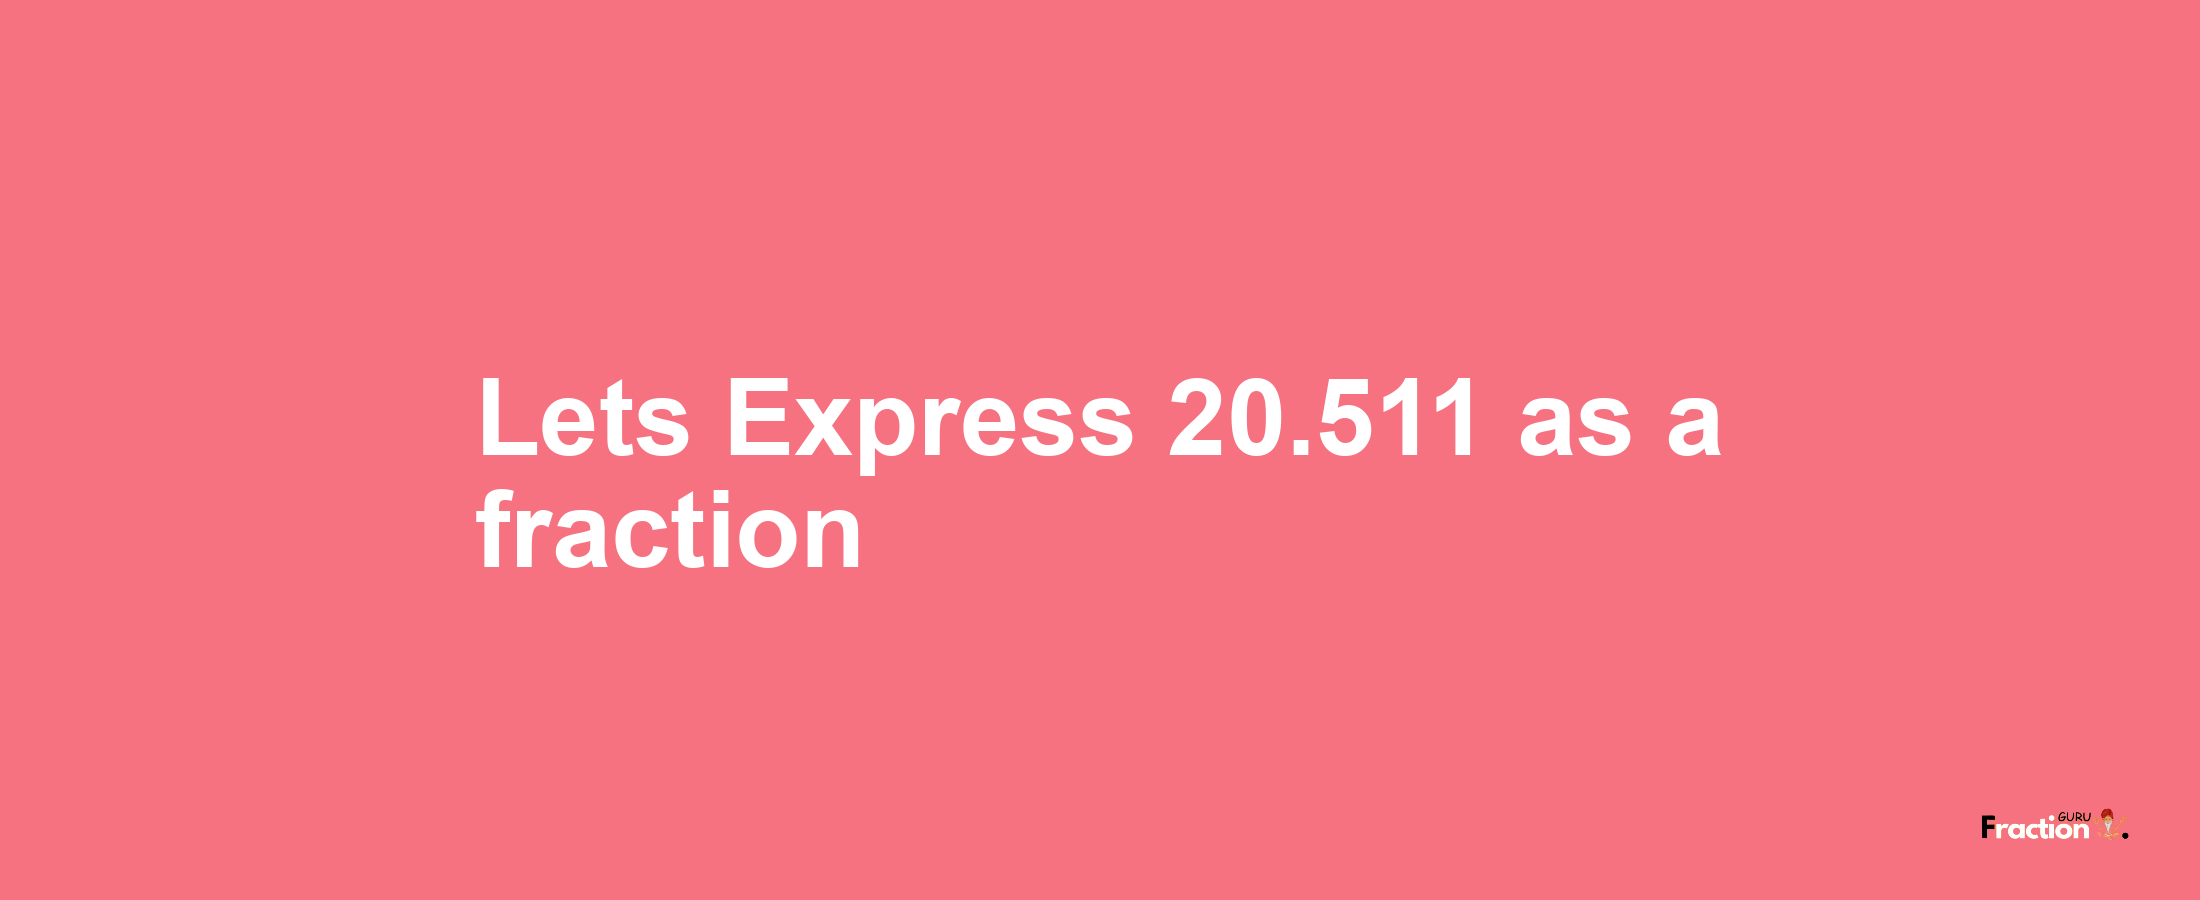 Lets Express 20.511 as afraction